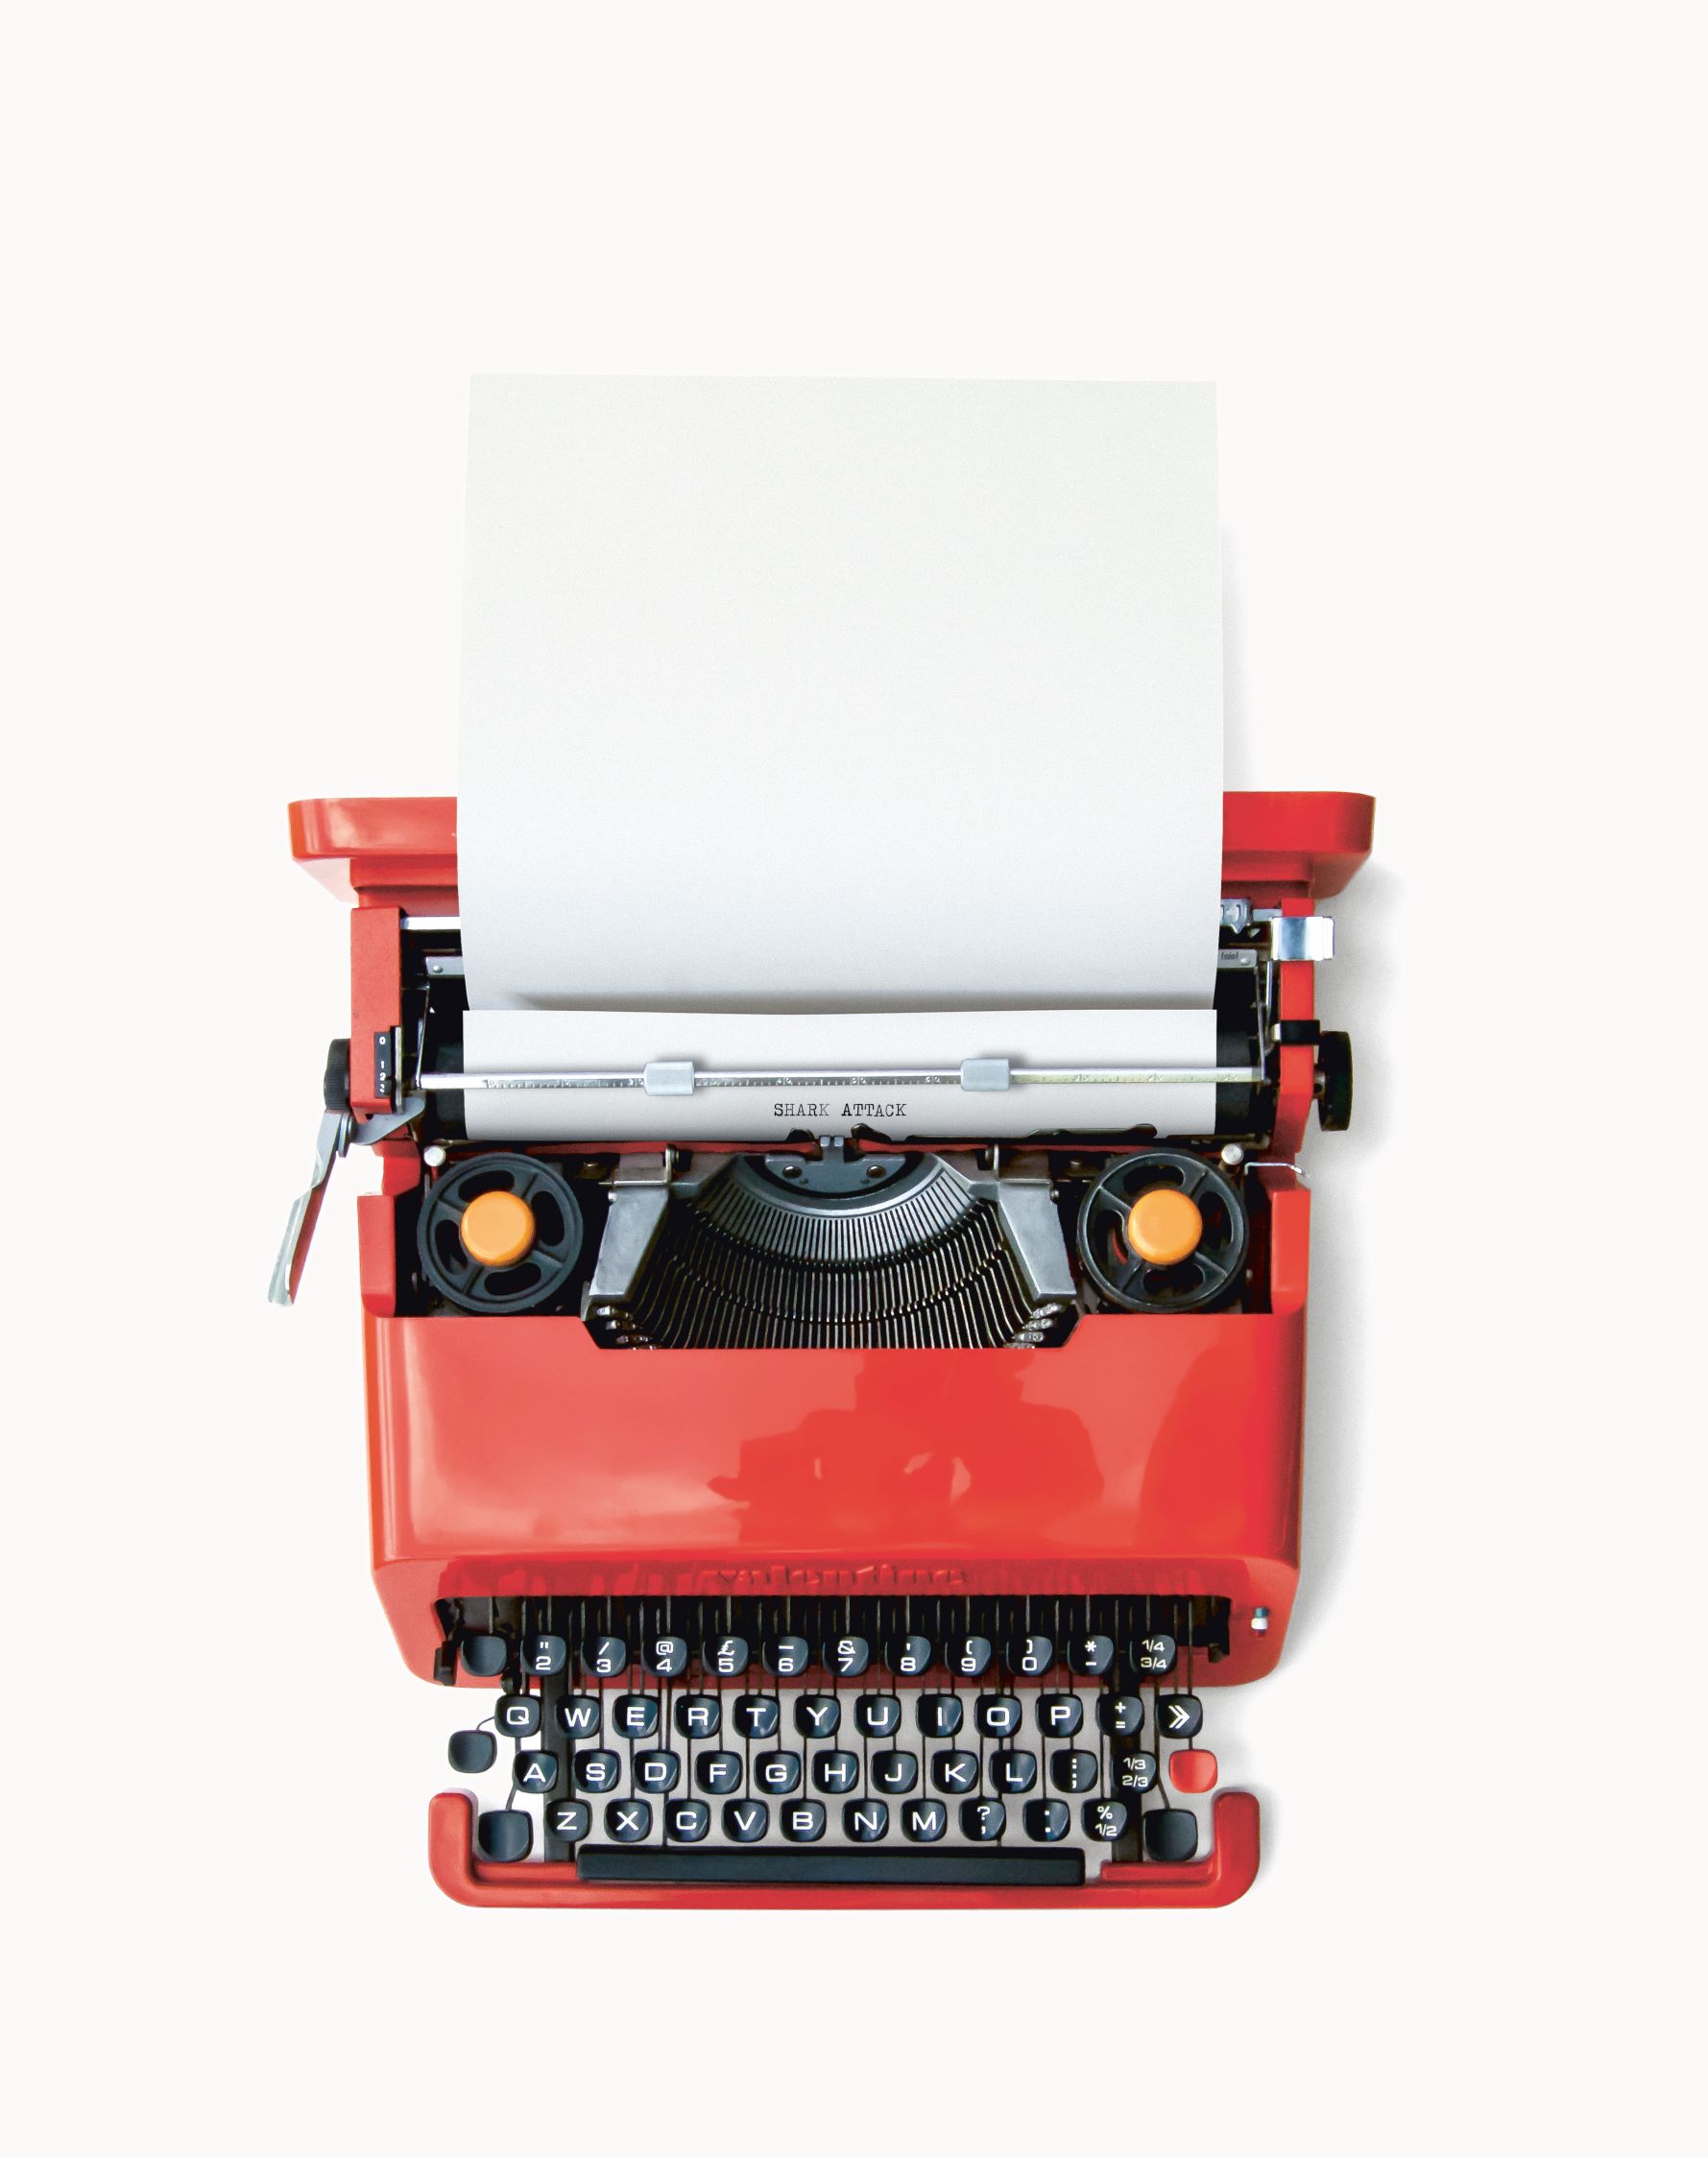 Olivetti Valentine (1968 (nicknamed “The Portable Red”), photograph by Bruce Atkins, collection of John Gloyne 